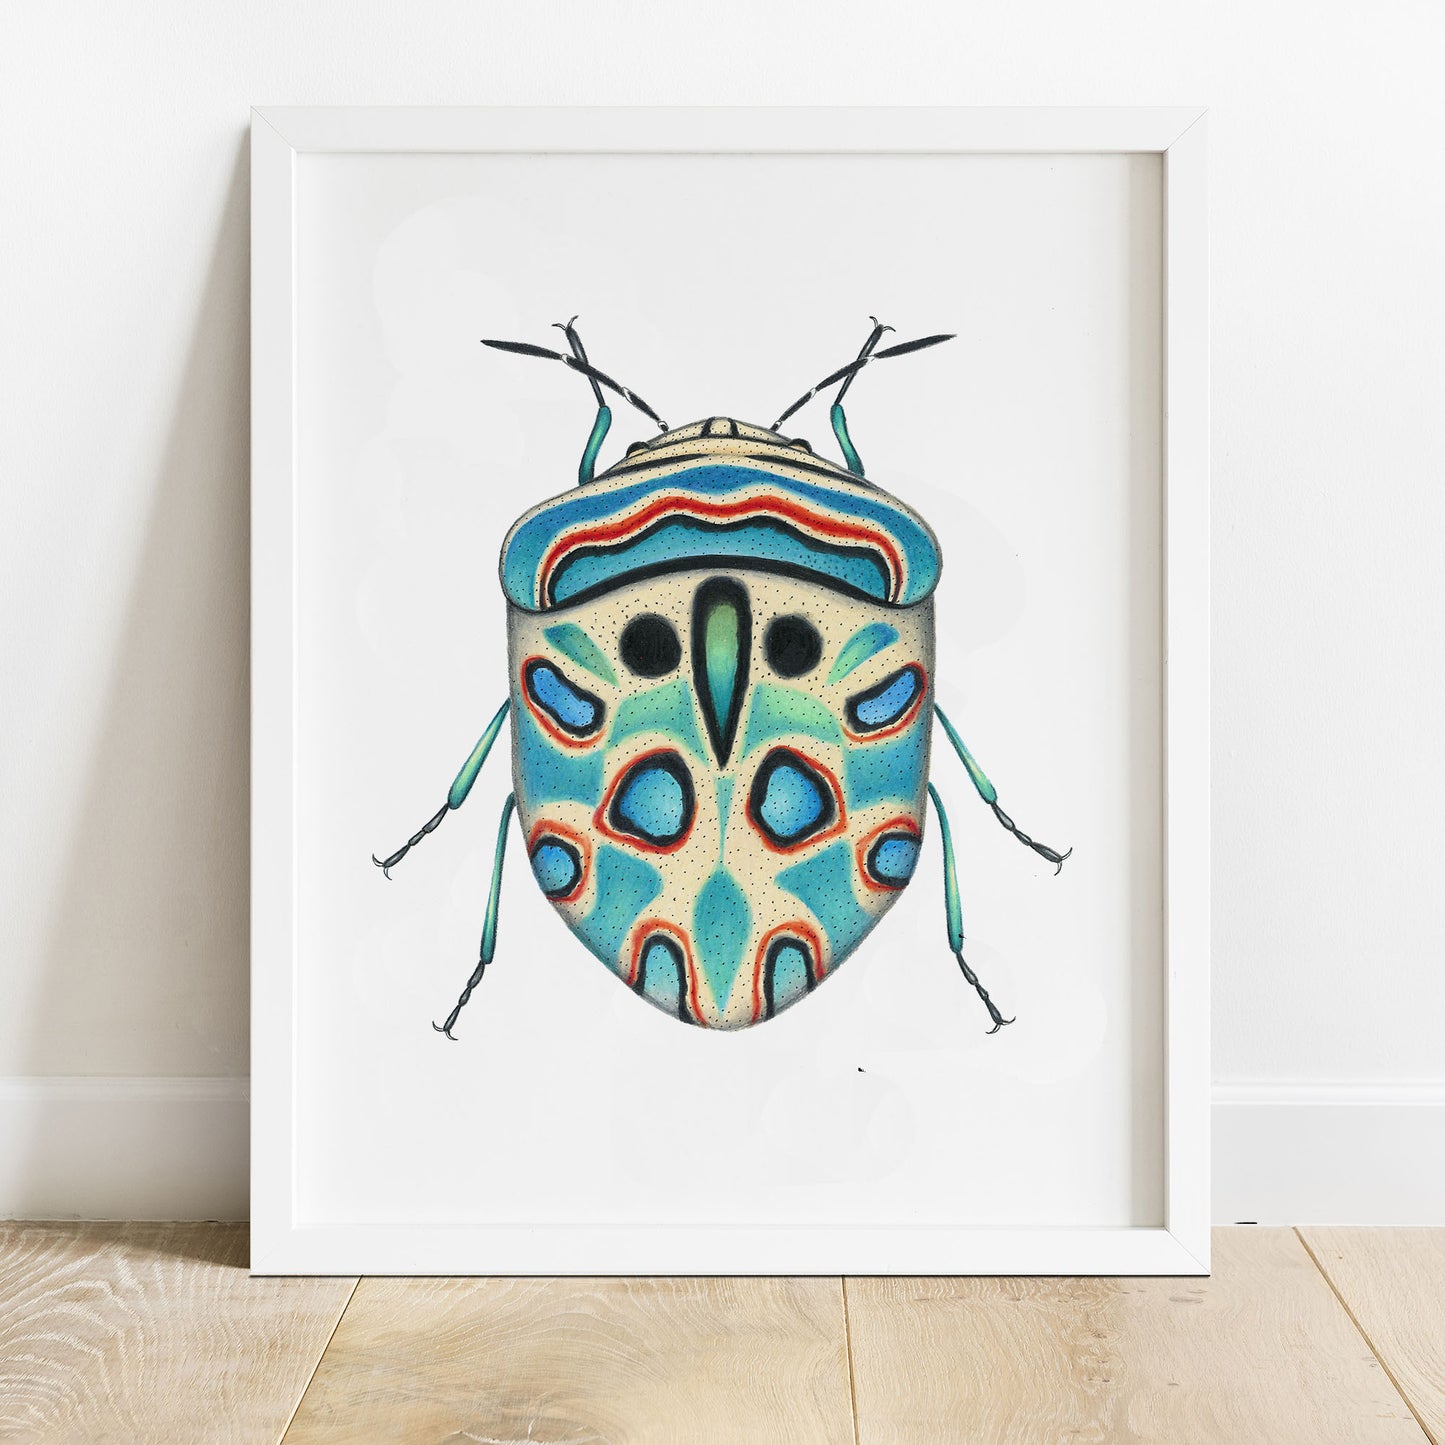 Hand drawn pencil art of a Picasso bug by Rachel Diaz-Bastin. Prints available.